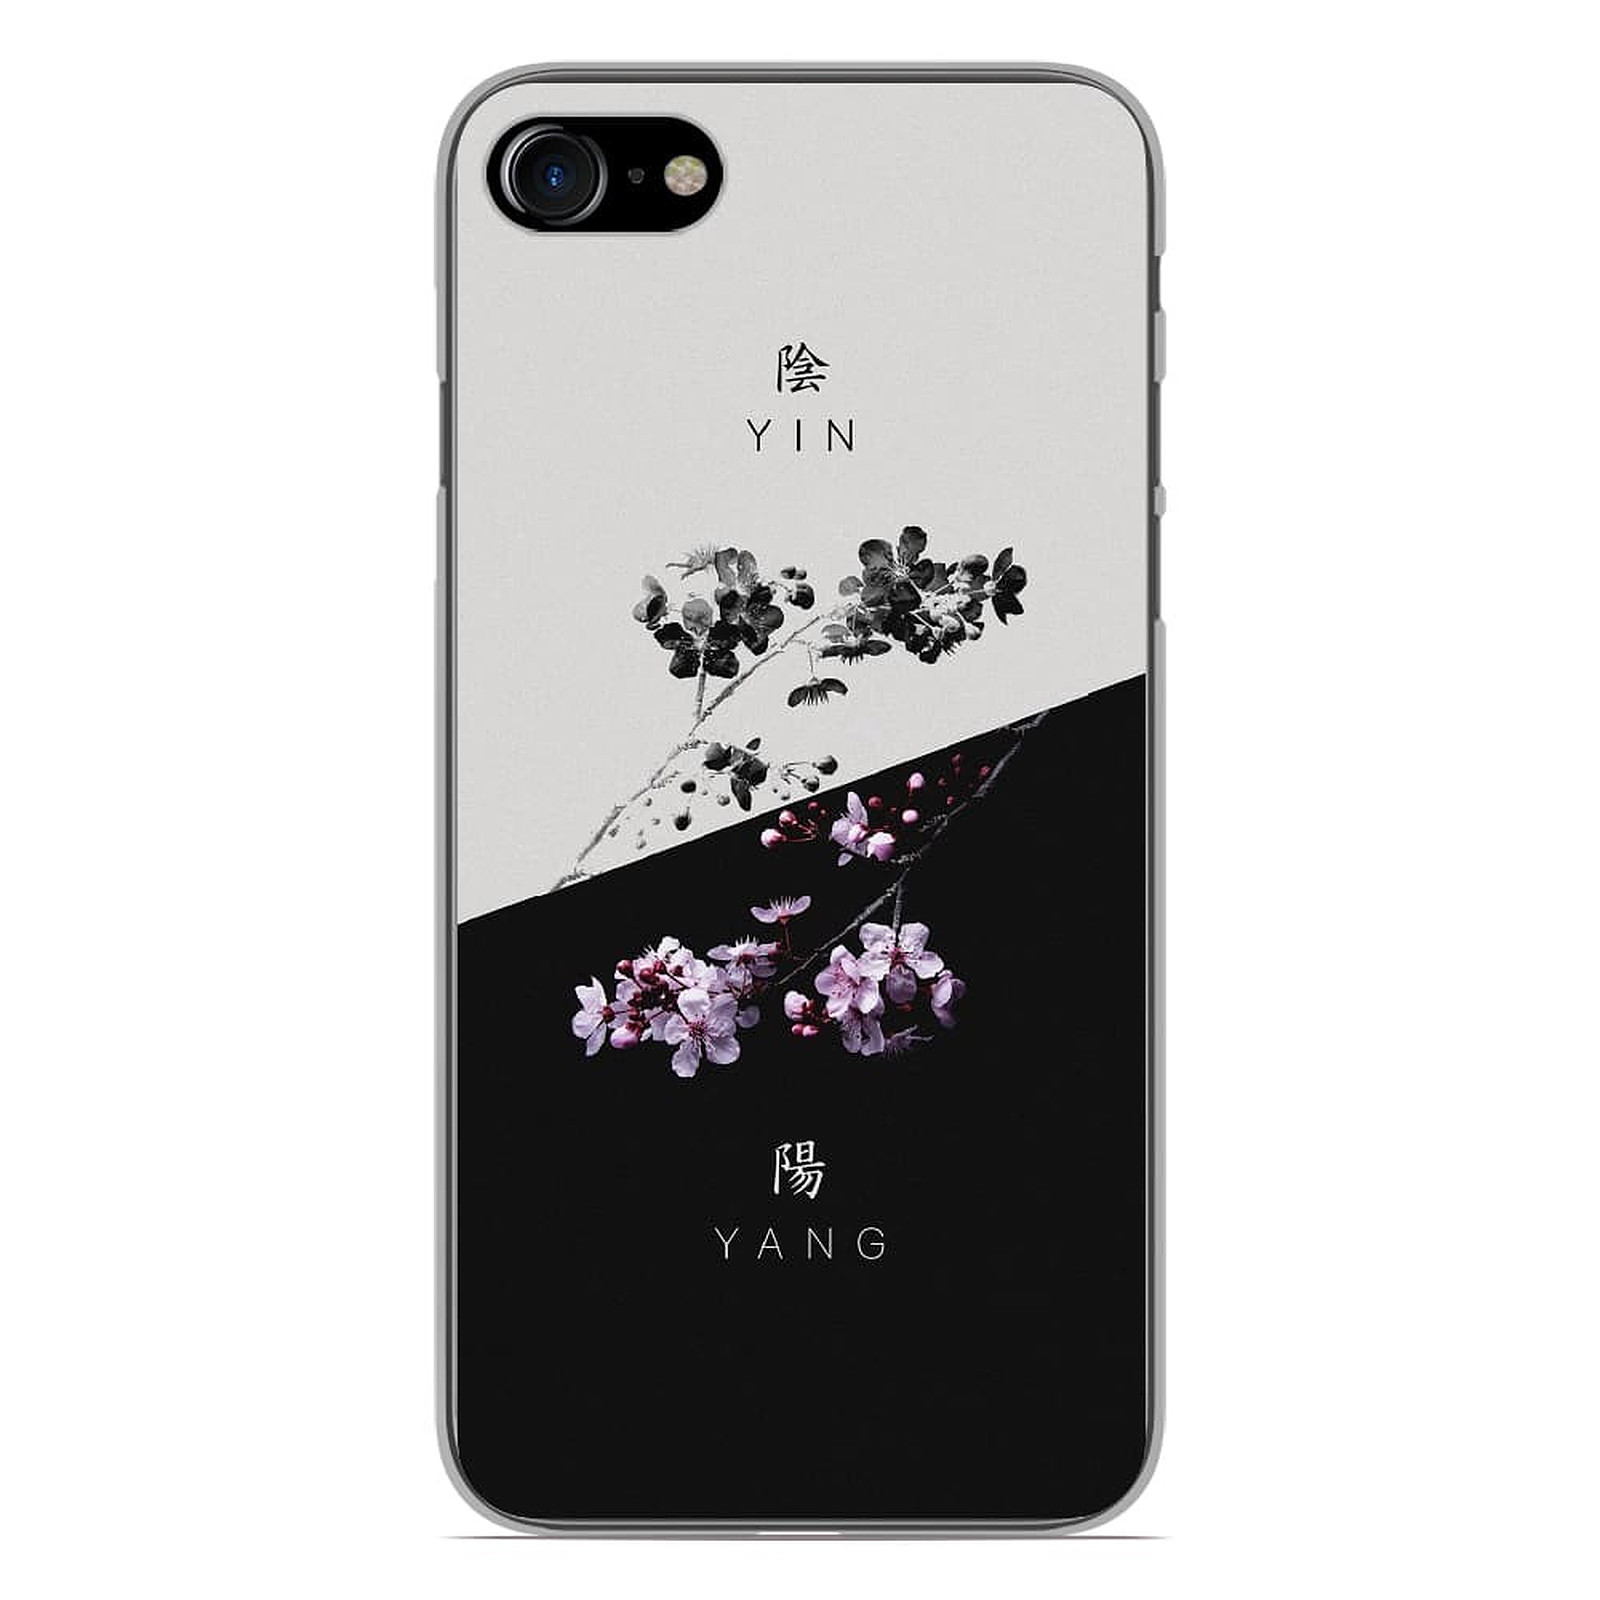 1001 Coques Coque silicone gel Apple iPhone 7 motif Yin et Yang - Coque telephone 1001Coques